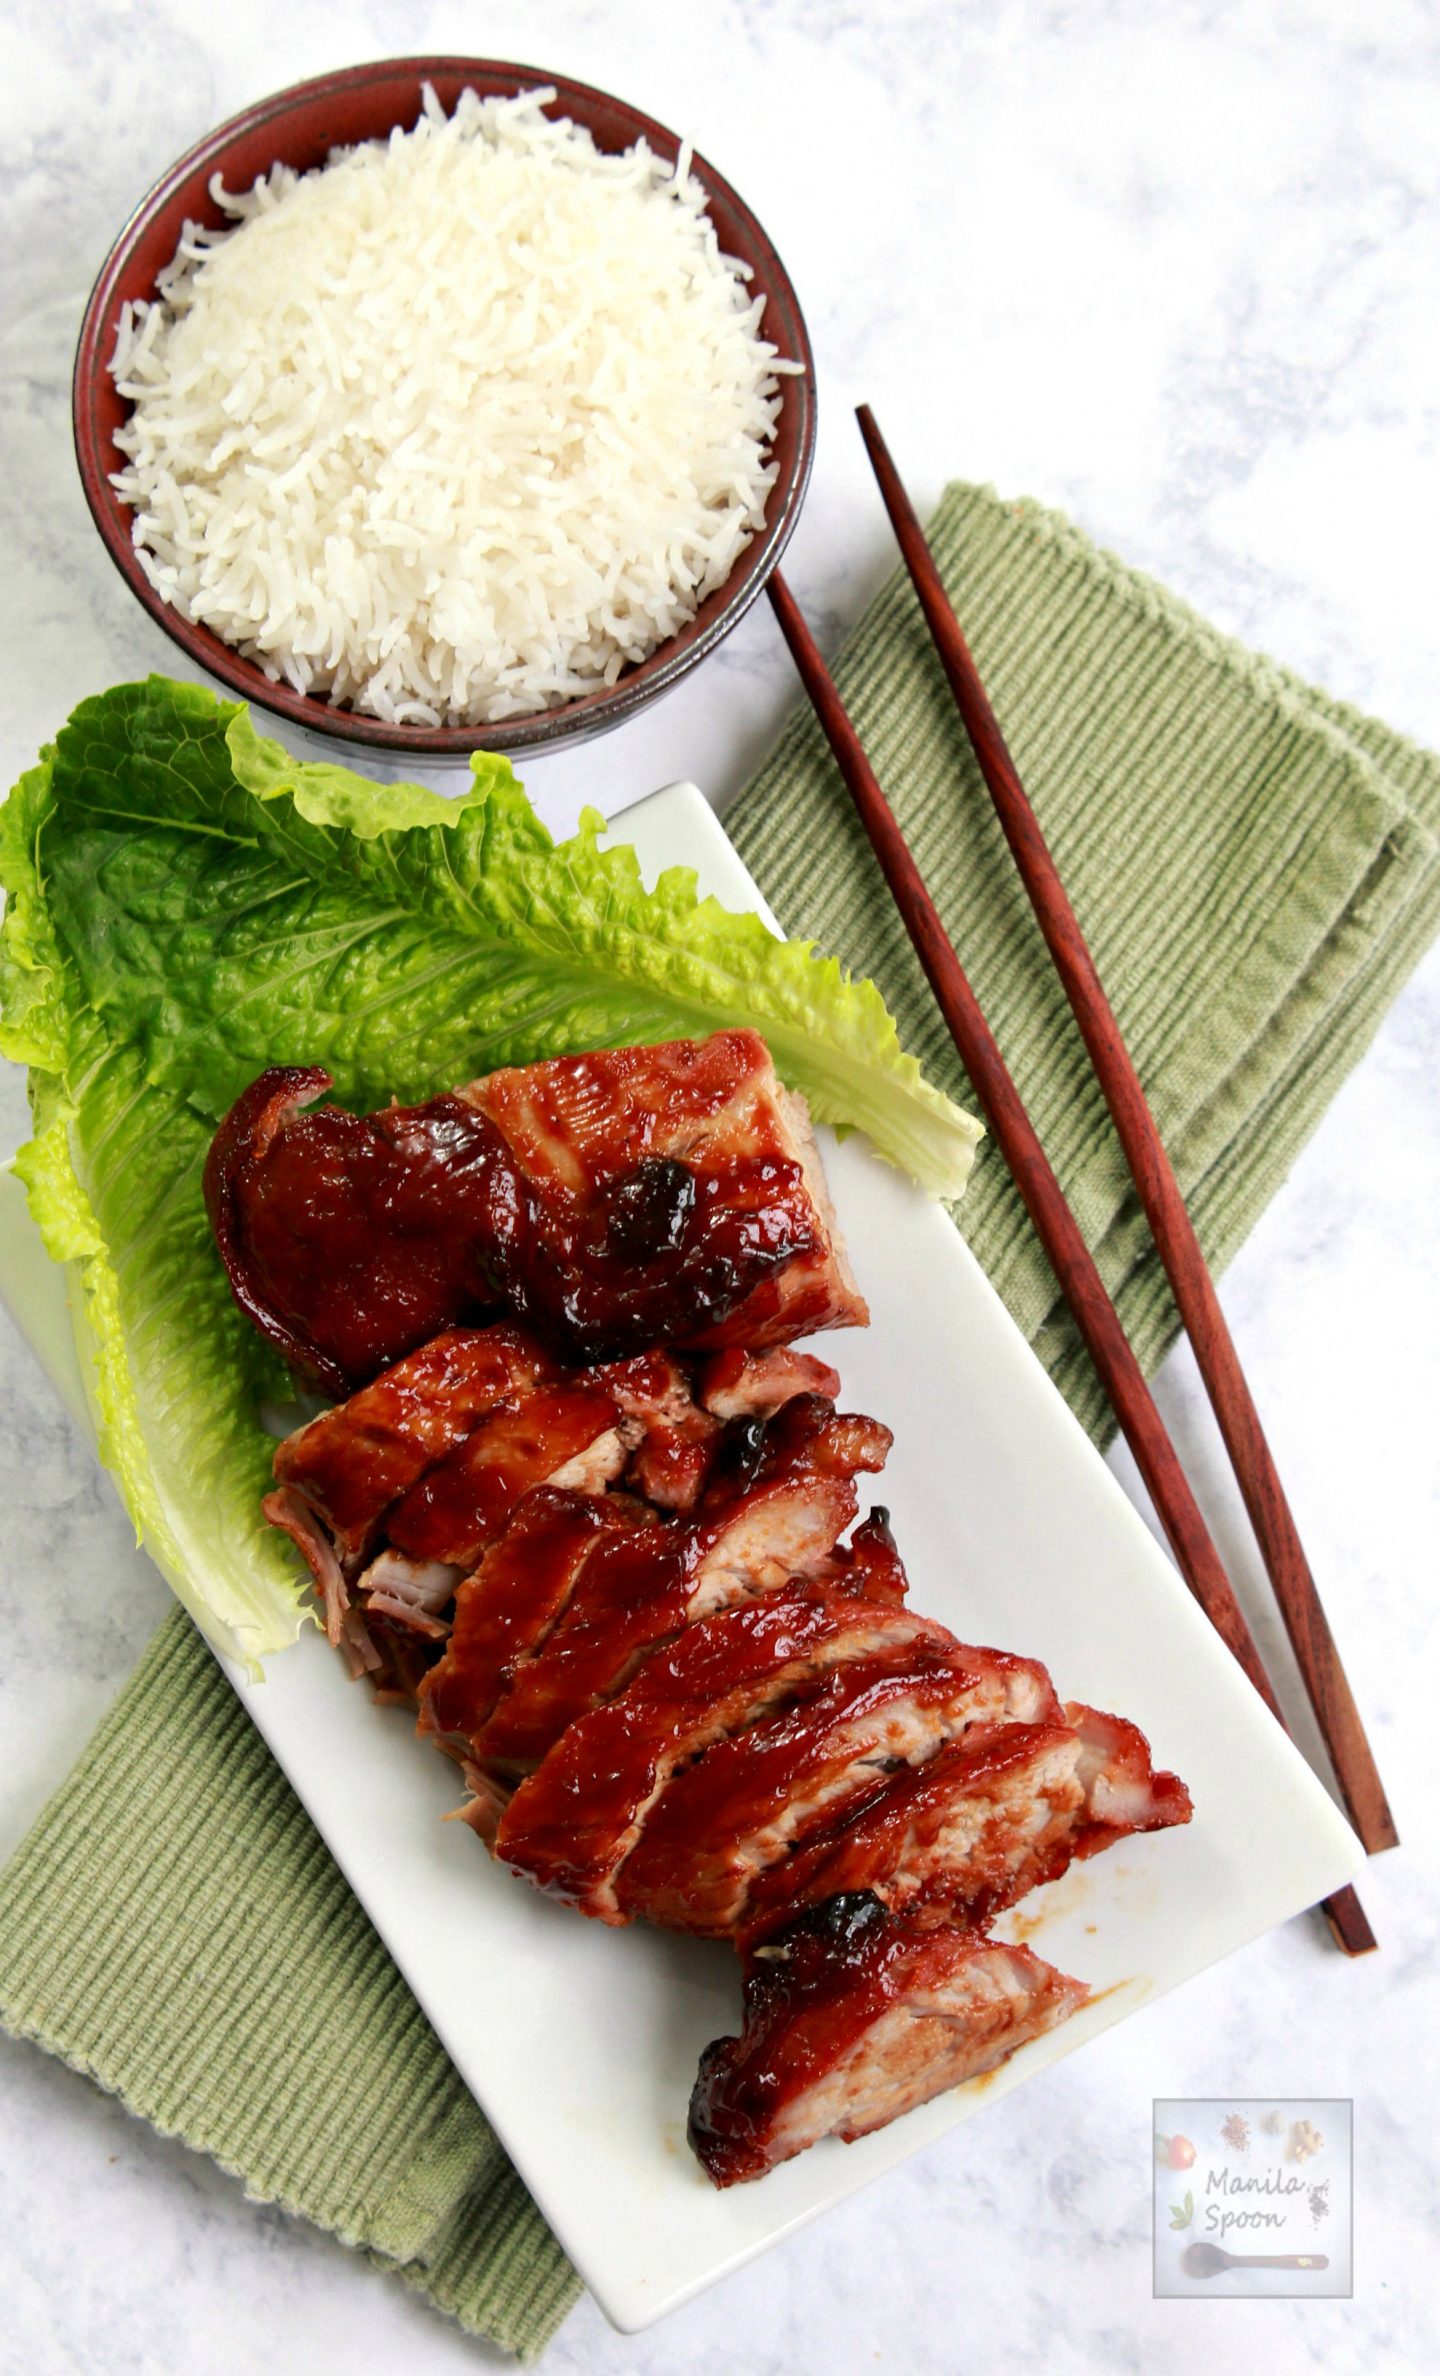 A quick and easy recipe for Chinese Barbecue Pork (Char Siu) using a combo of store-bought sauces so no extra work is required but the result is a delicious meat that comes out so tender and tasty!